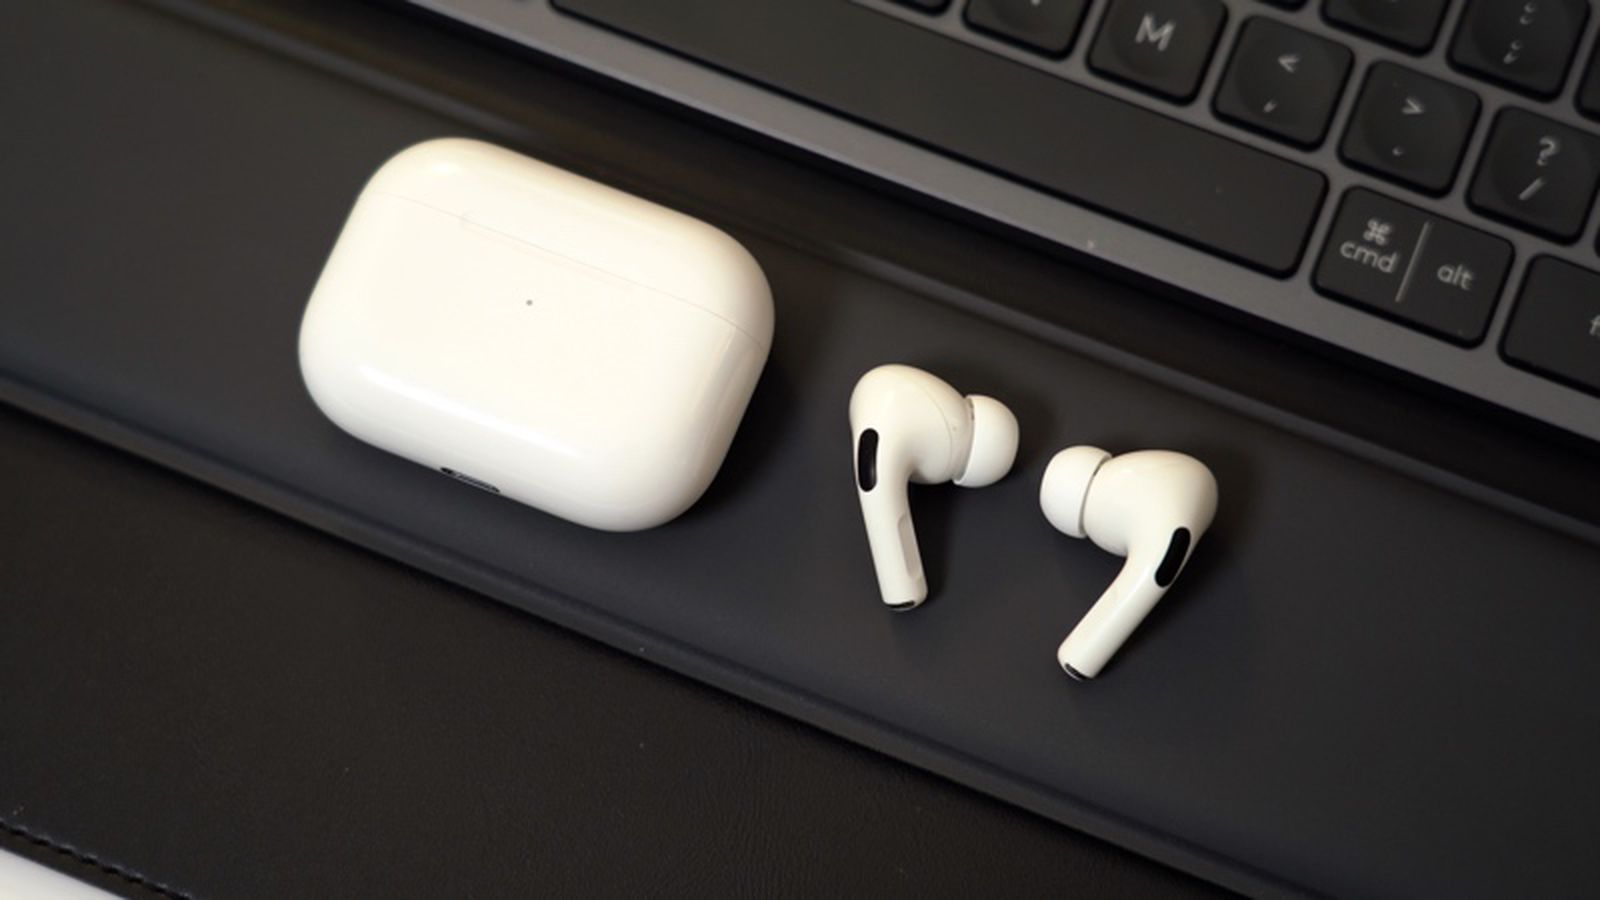 New AirPods Pro and iPhone SE are rumored to launch in April 2021